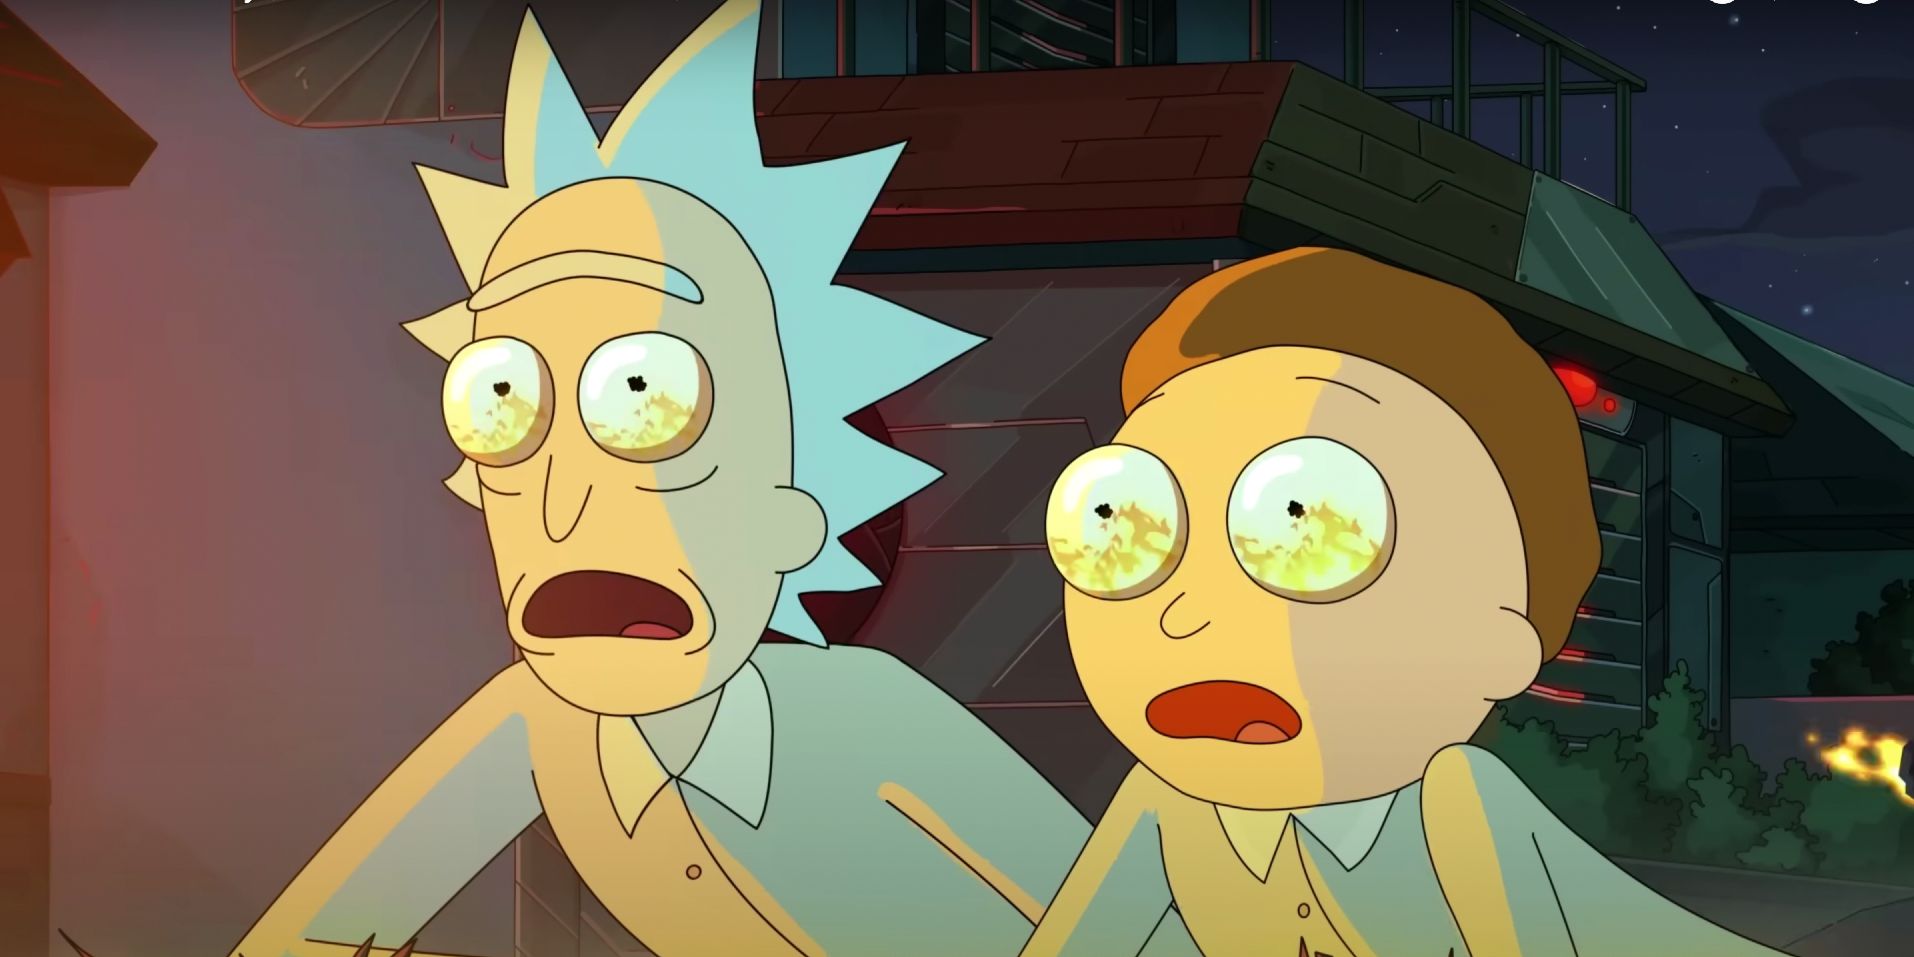 Rick & Morty Season 6 Will Be One Of The Best, Promises Co-Creator